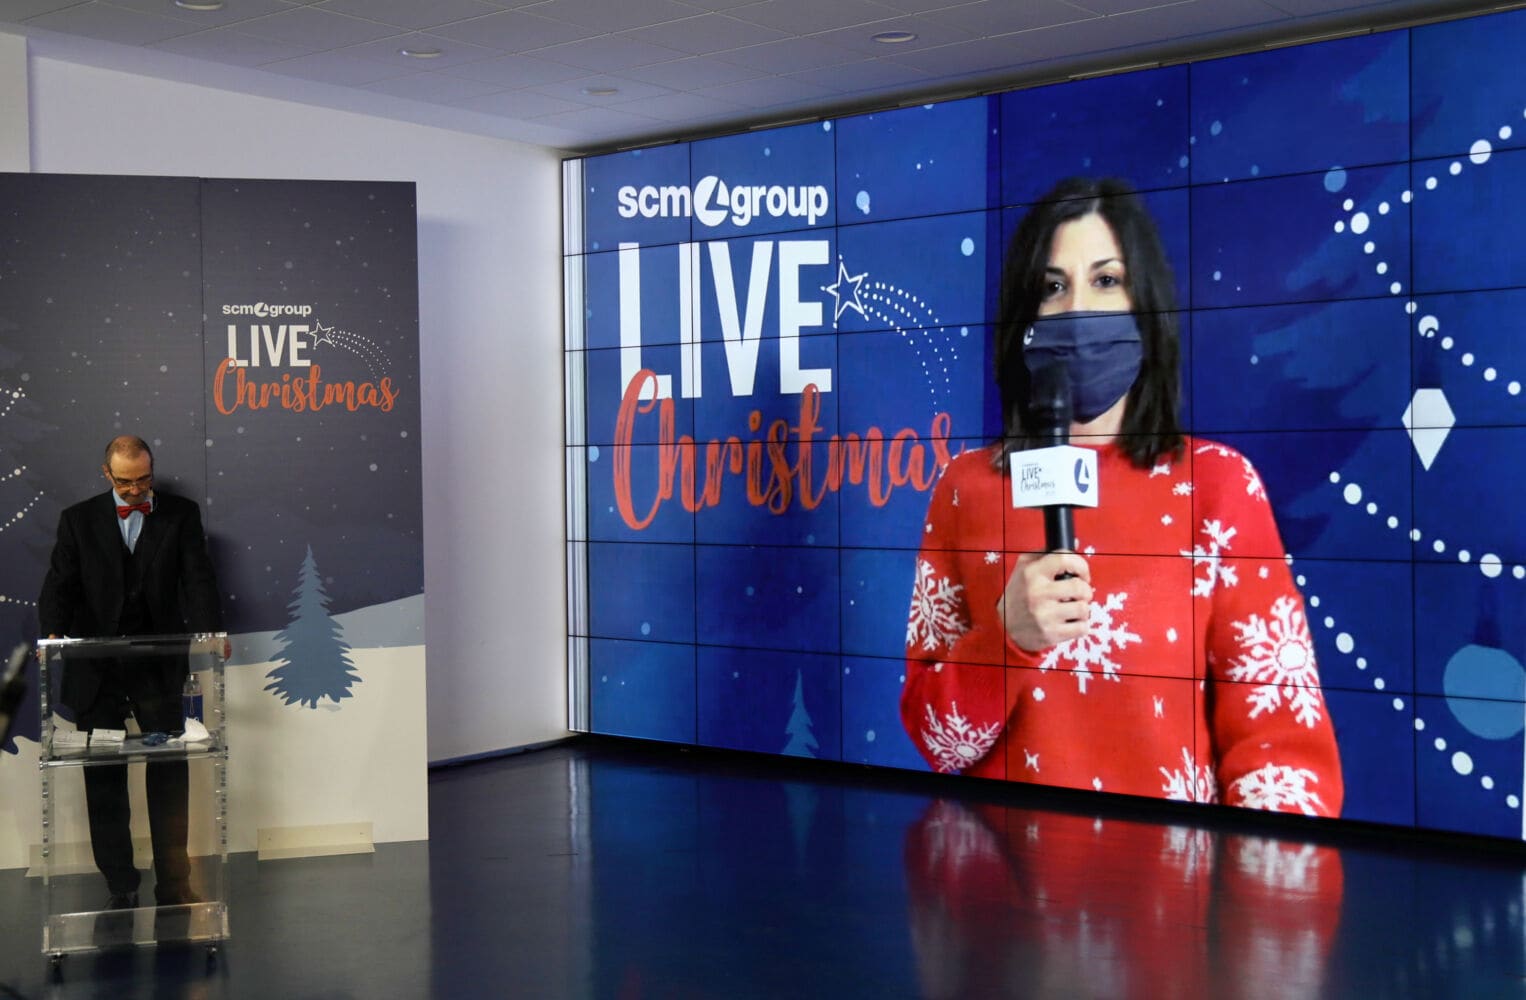 Scm Group Live Christmas: an event in the name of people and sharing